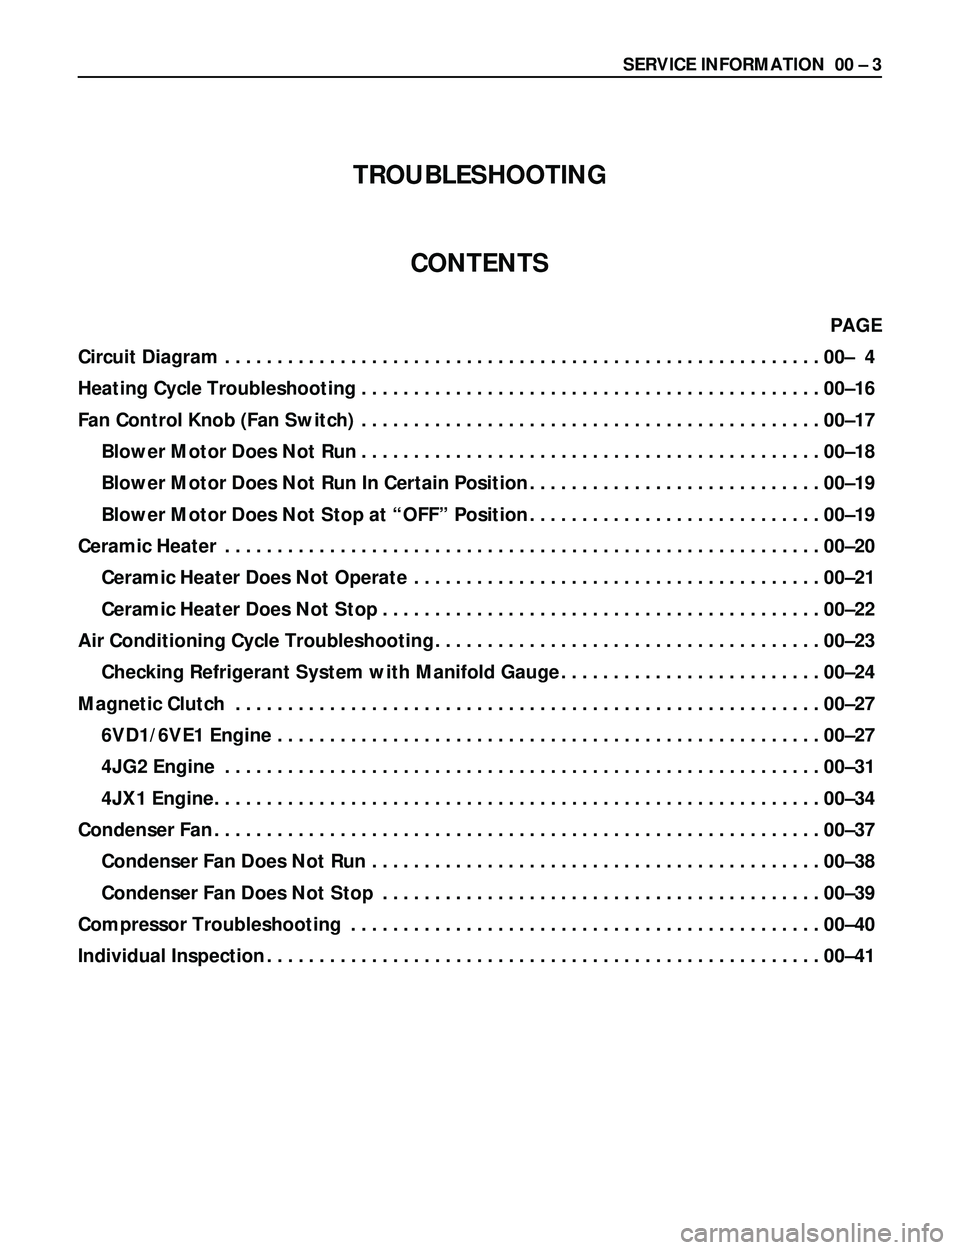 ISUZU TROOPER 1998  Service Service Manual SERVICE INFORMATION  00 Ð 3
TROUBLESHOOTING
CONTENTS
PAGE 
Circuit Diagram.........................................................00Ð 4
Heating Cycle Troubleshooting................................